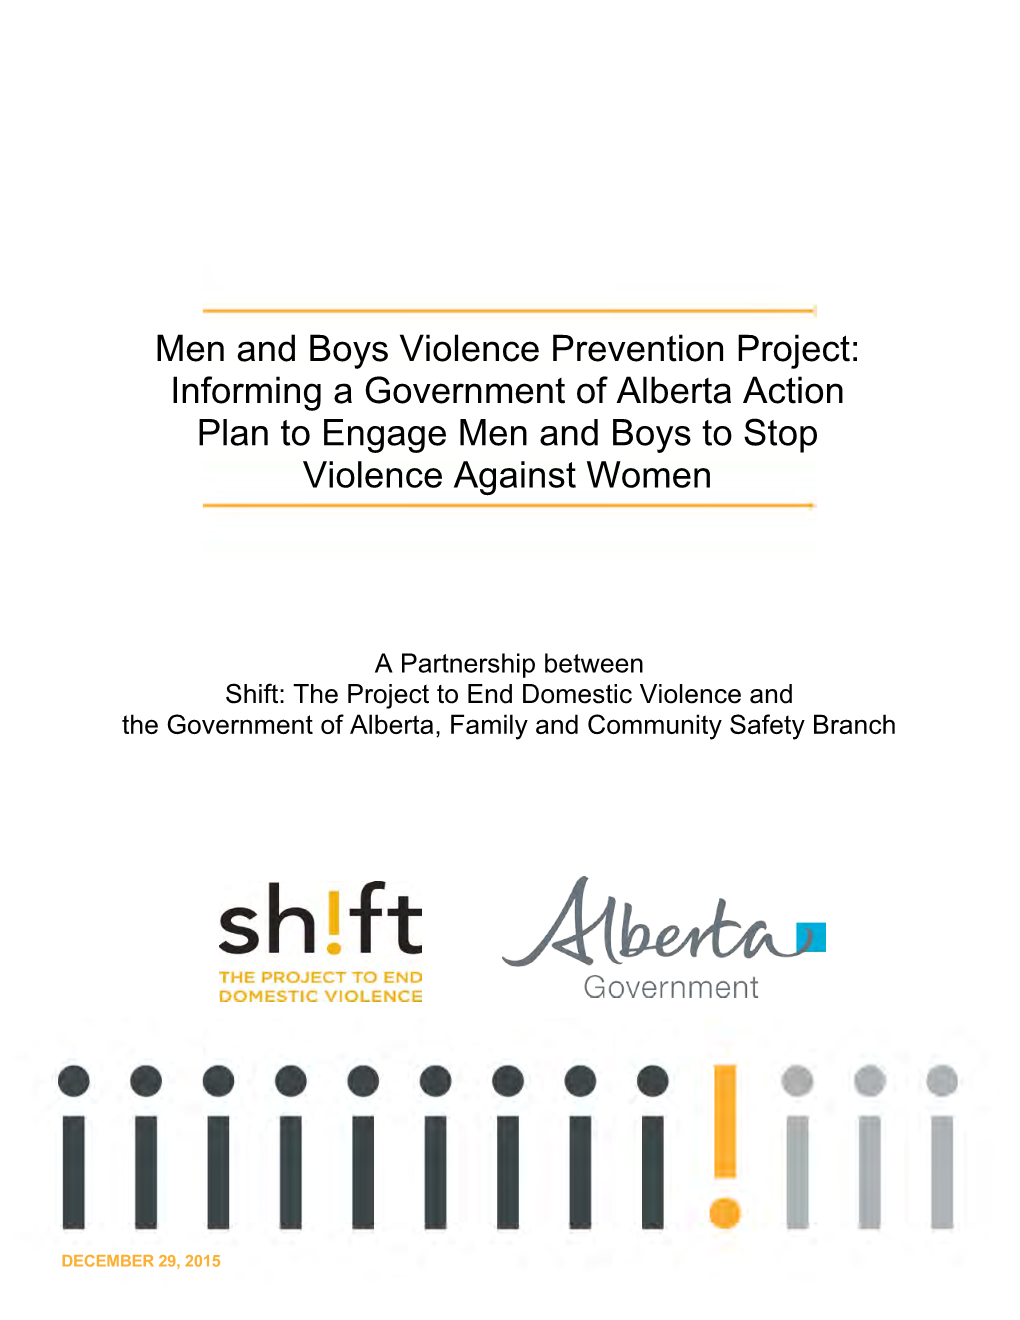 Men and Boys Violence Prevention Project: Informing a Government of Alberta Action Plan to Engage Men and Boys to Stop Violence Against Women